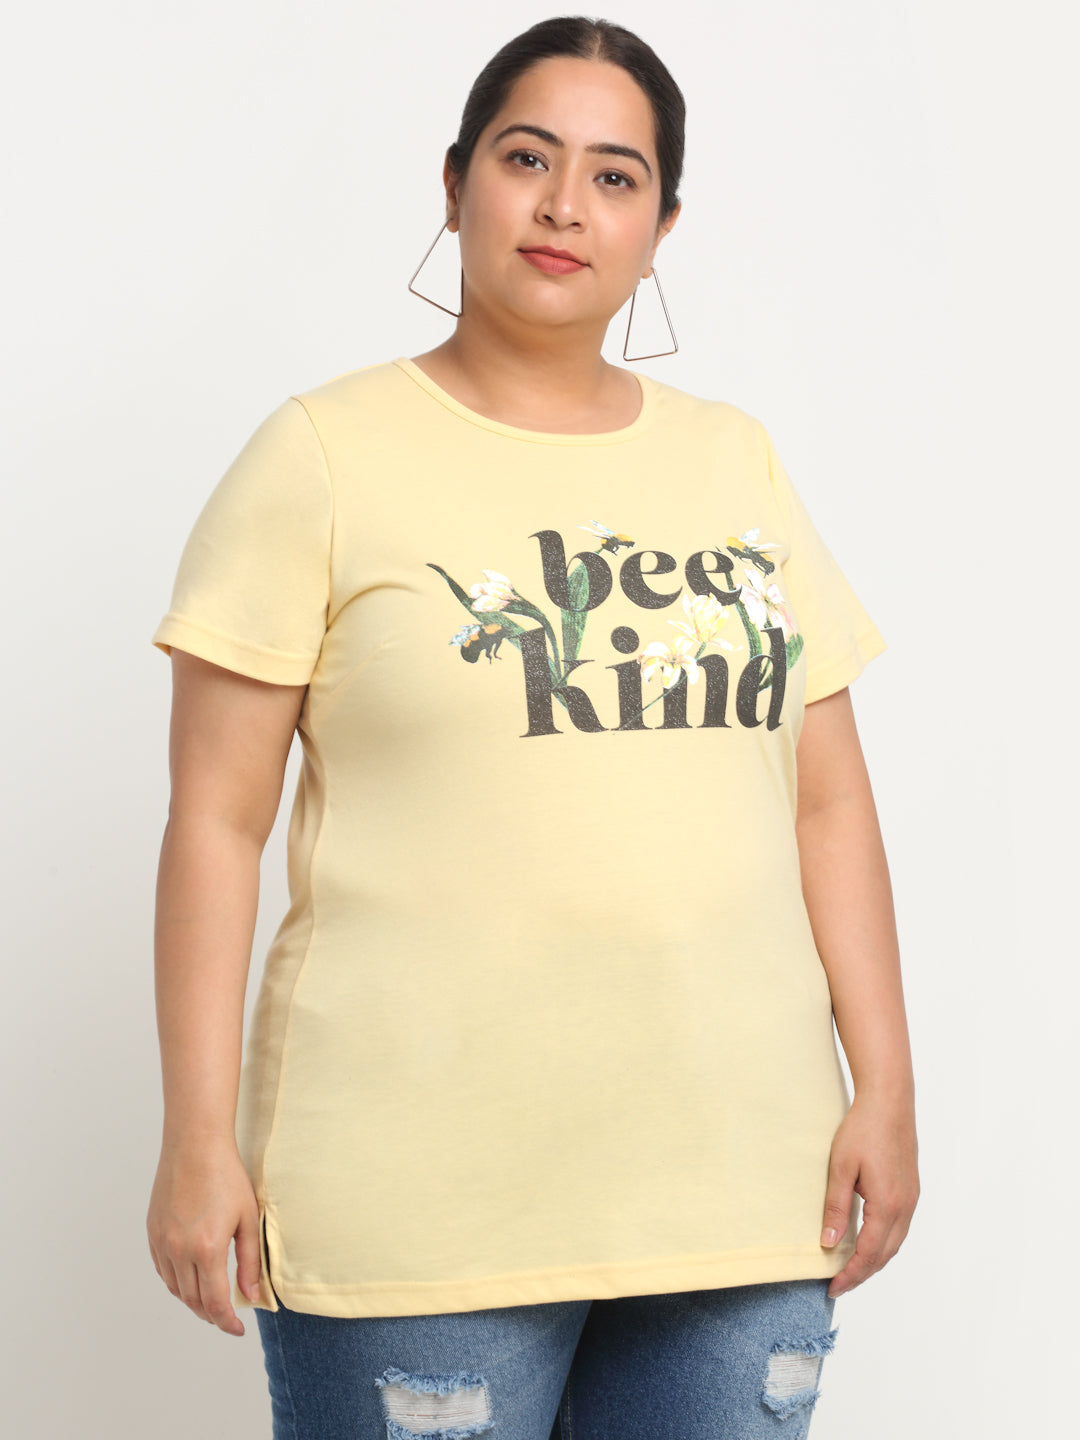 Plus Size Typography Printed Cotton T-shirt